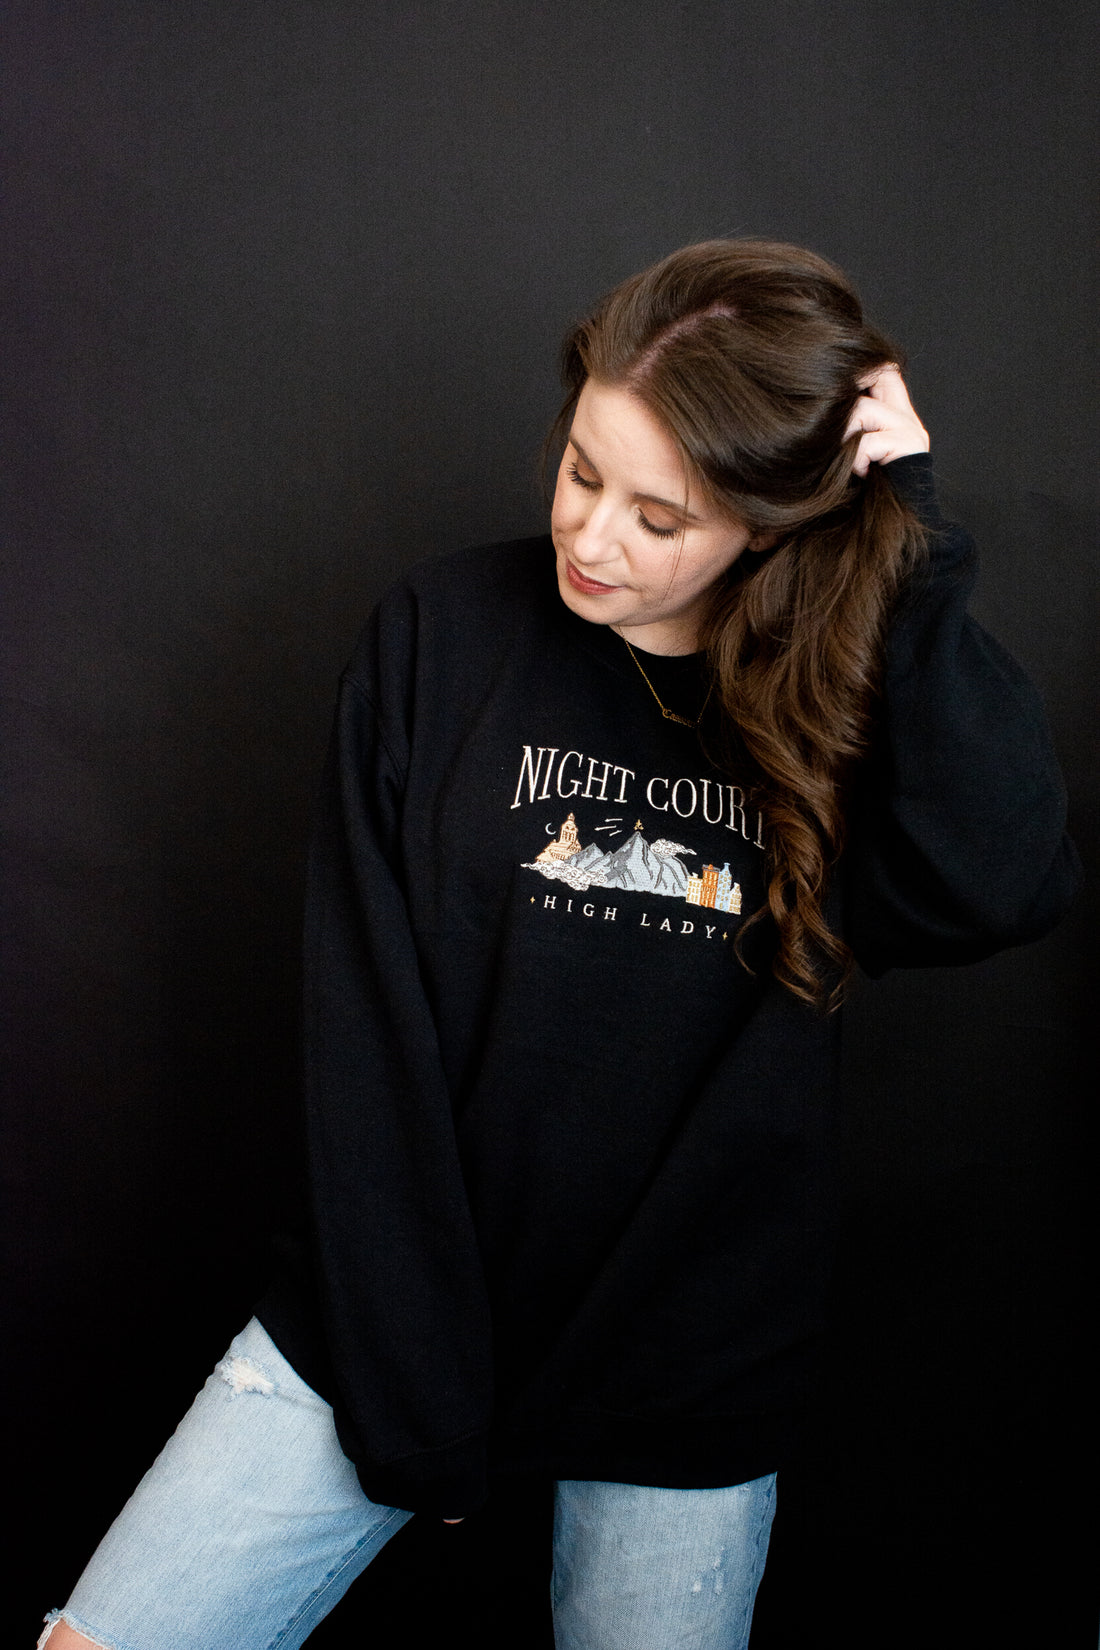 High Lady of the Night Court Crewneck